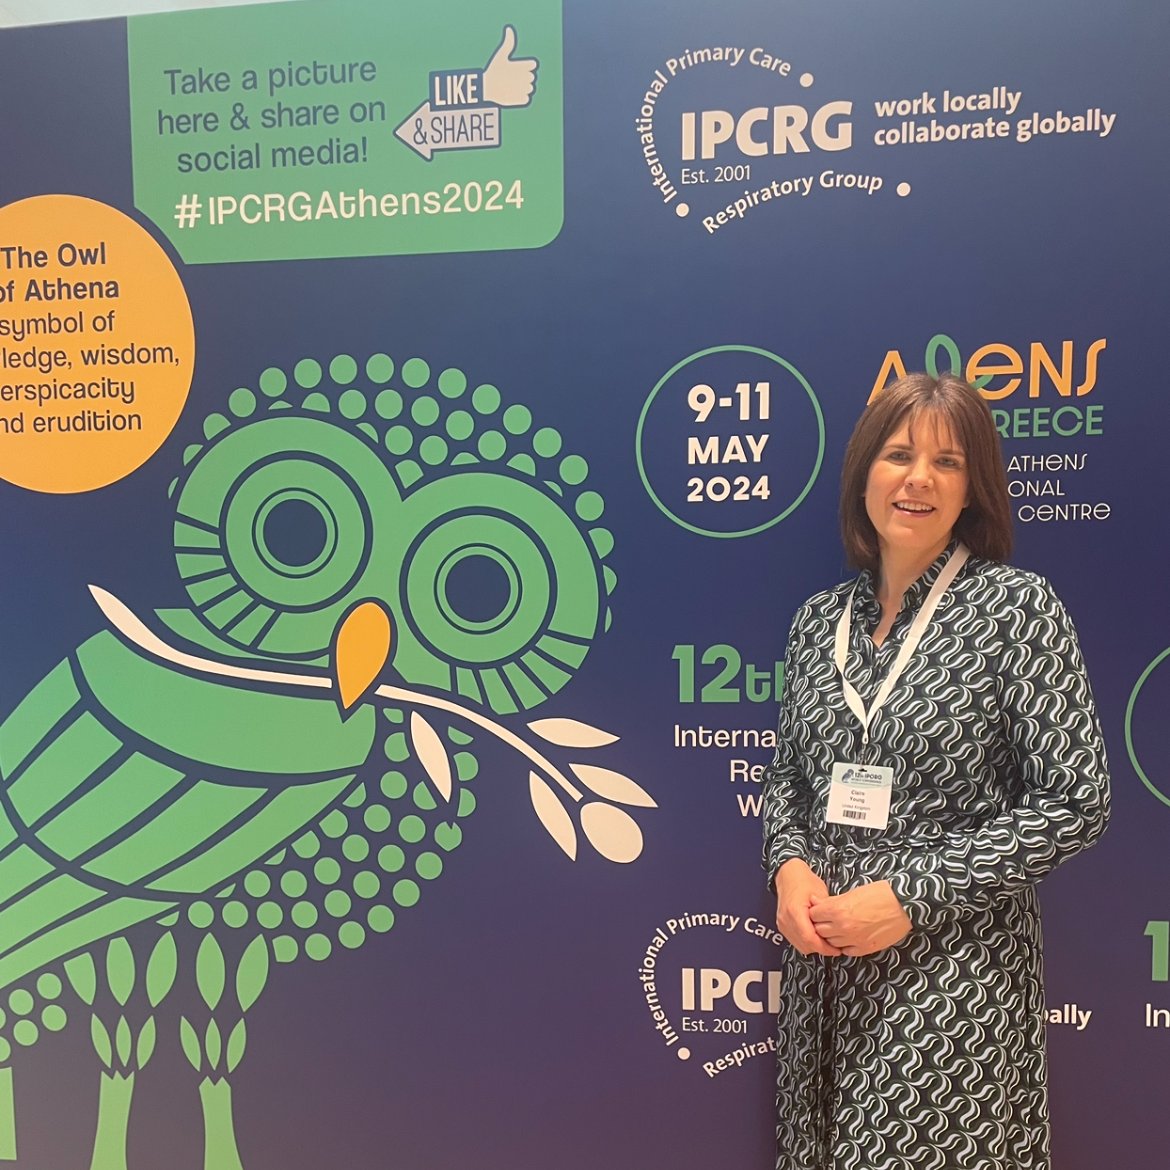 Claire Young - Adv. Pharm. Practice MSc #alumni
@UlsterUniSPPS presenting her Masters research project at #IPCRGAthens2024 today in Athens, Greece.

Claire analysed incidence of heart failure, atrial fibrillation & ischaemic heart disease in COPD patients in NI.

#WeAreUU